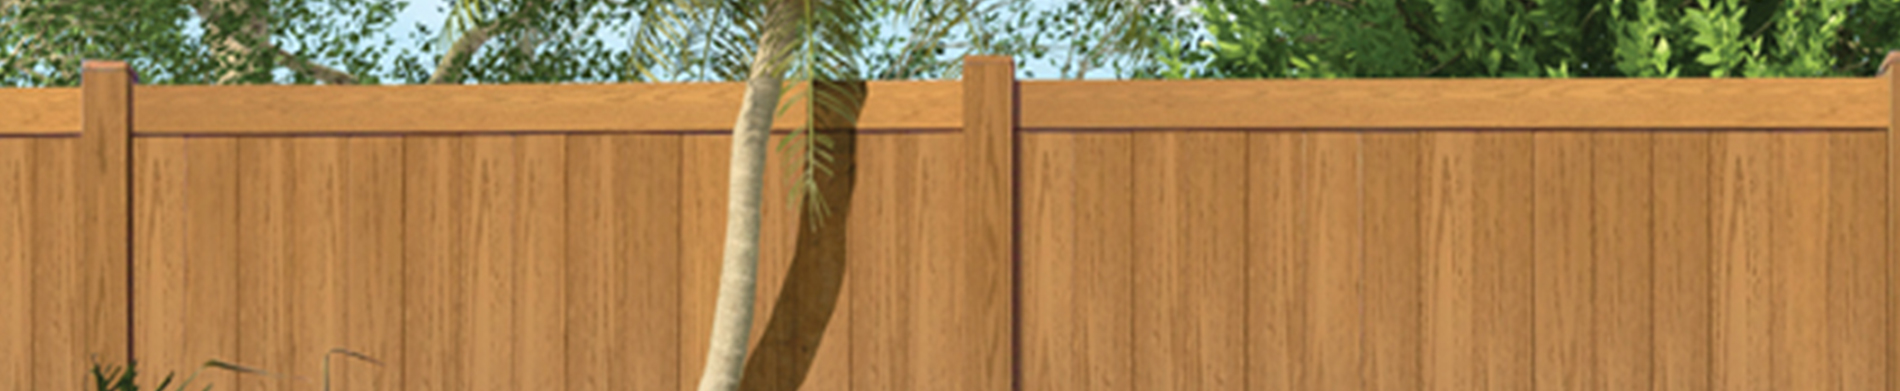 Install Vinyl Fencing Around Your Property to Keep it Dirt-free